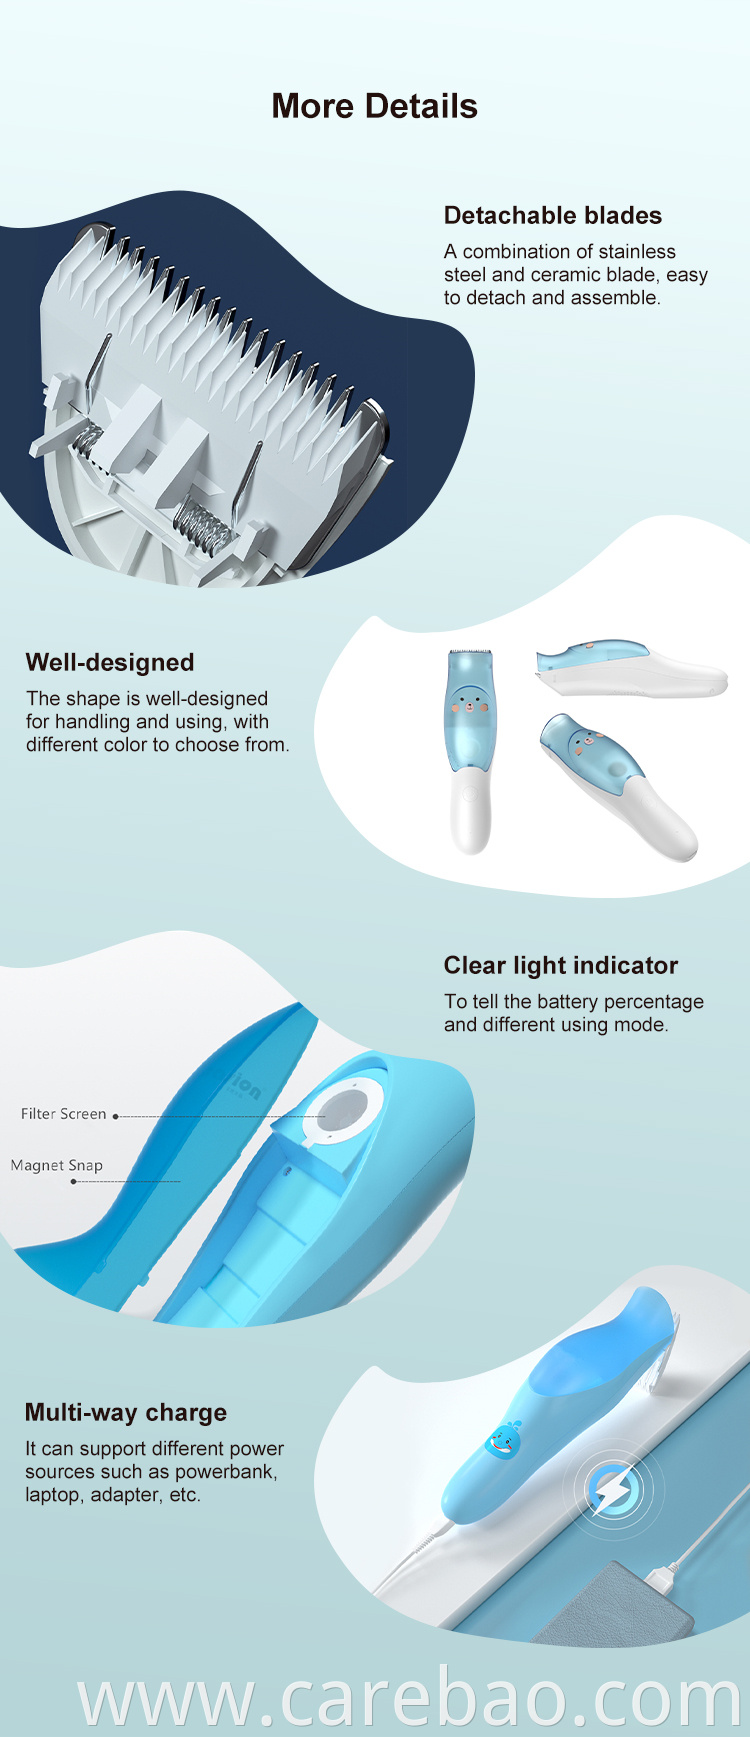 Top Sale Rechargeable Electric Baby Vacuum Hair Clipper For Kids With Safety R-shaped Detachable Ceramic Blades